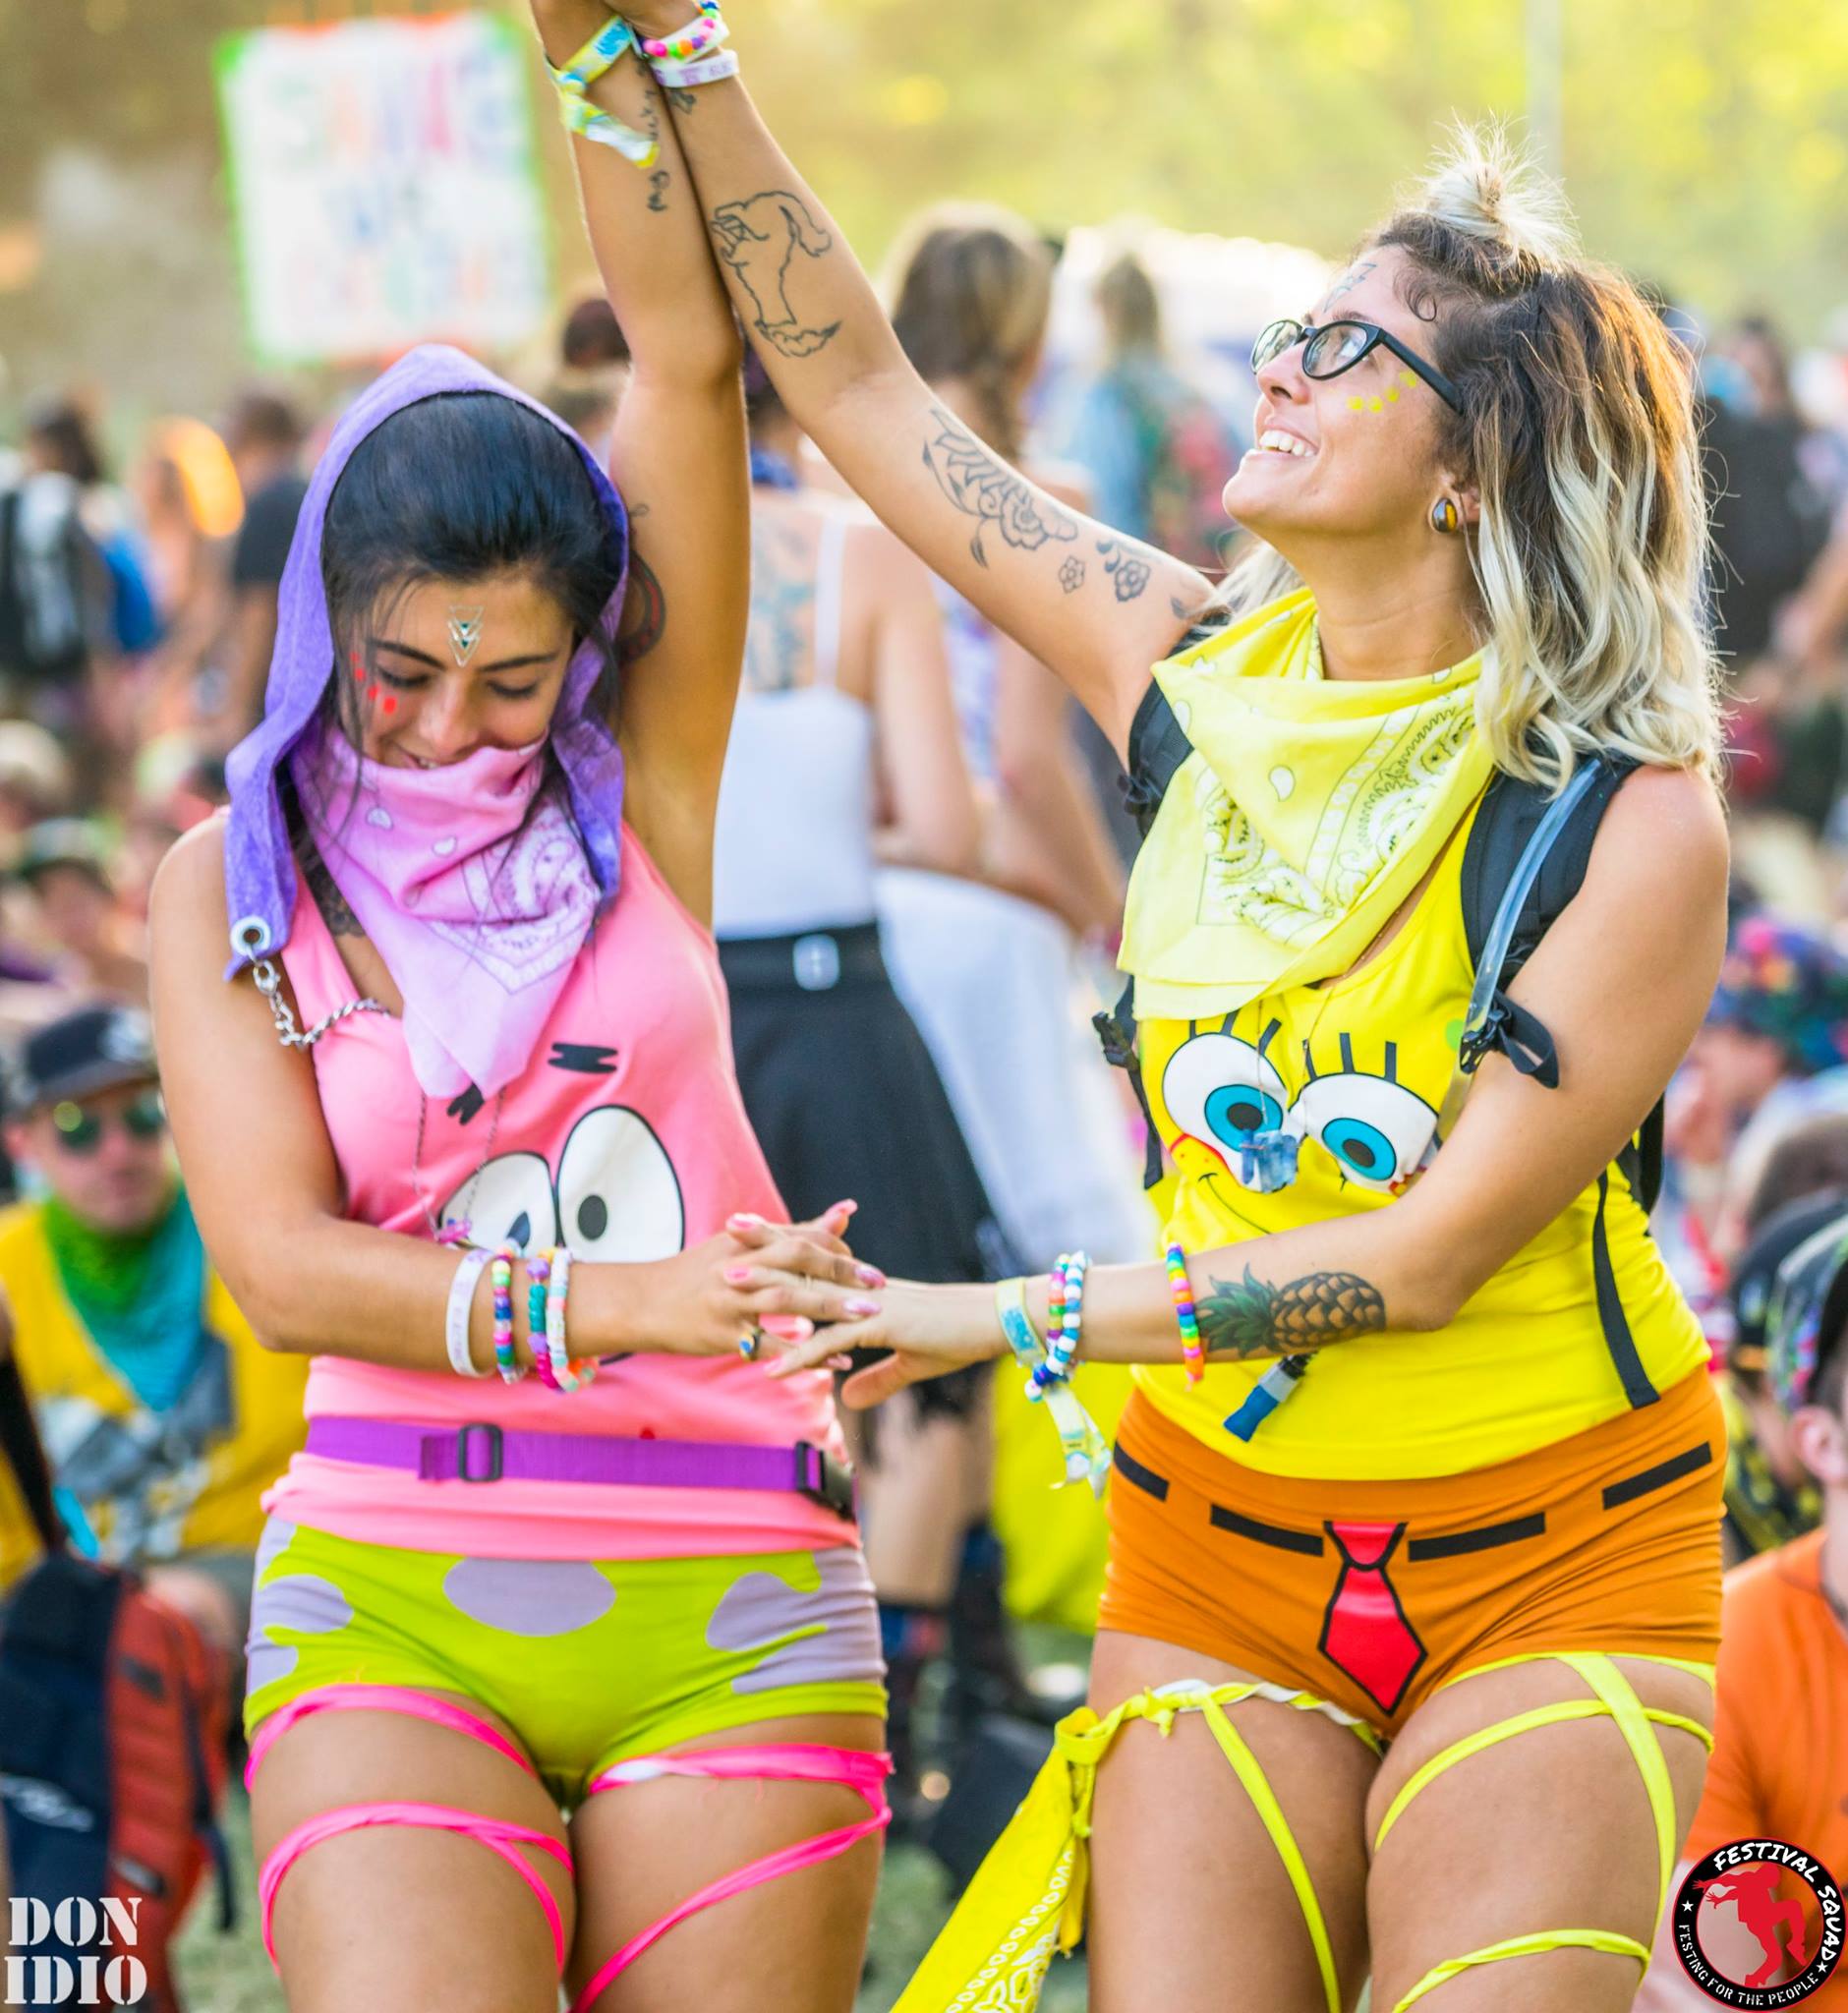 edc outfits